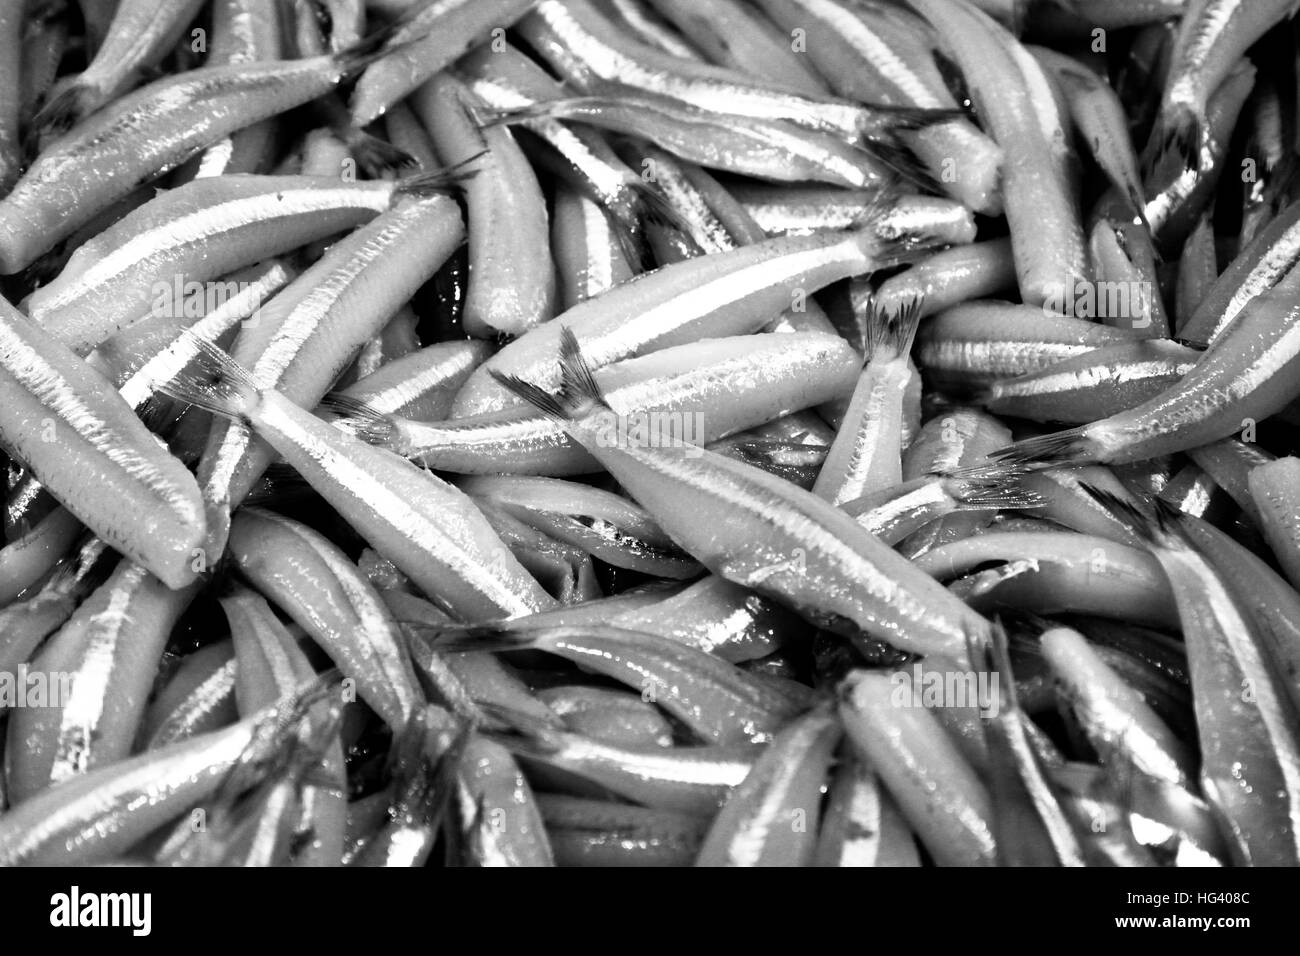 multiples of fish Stock Photo